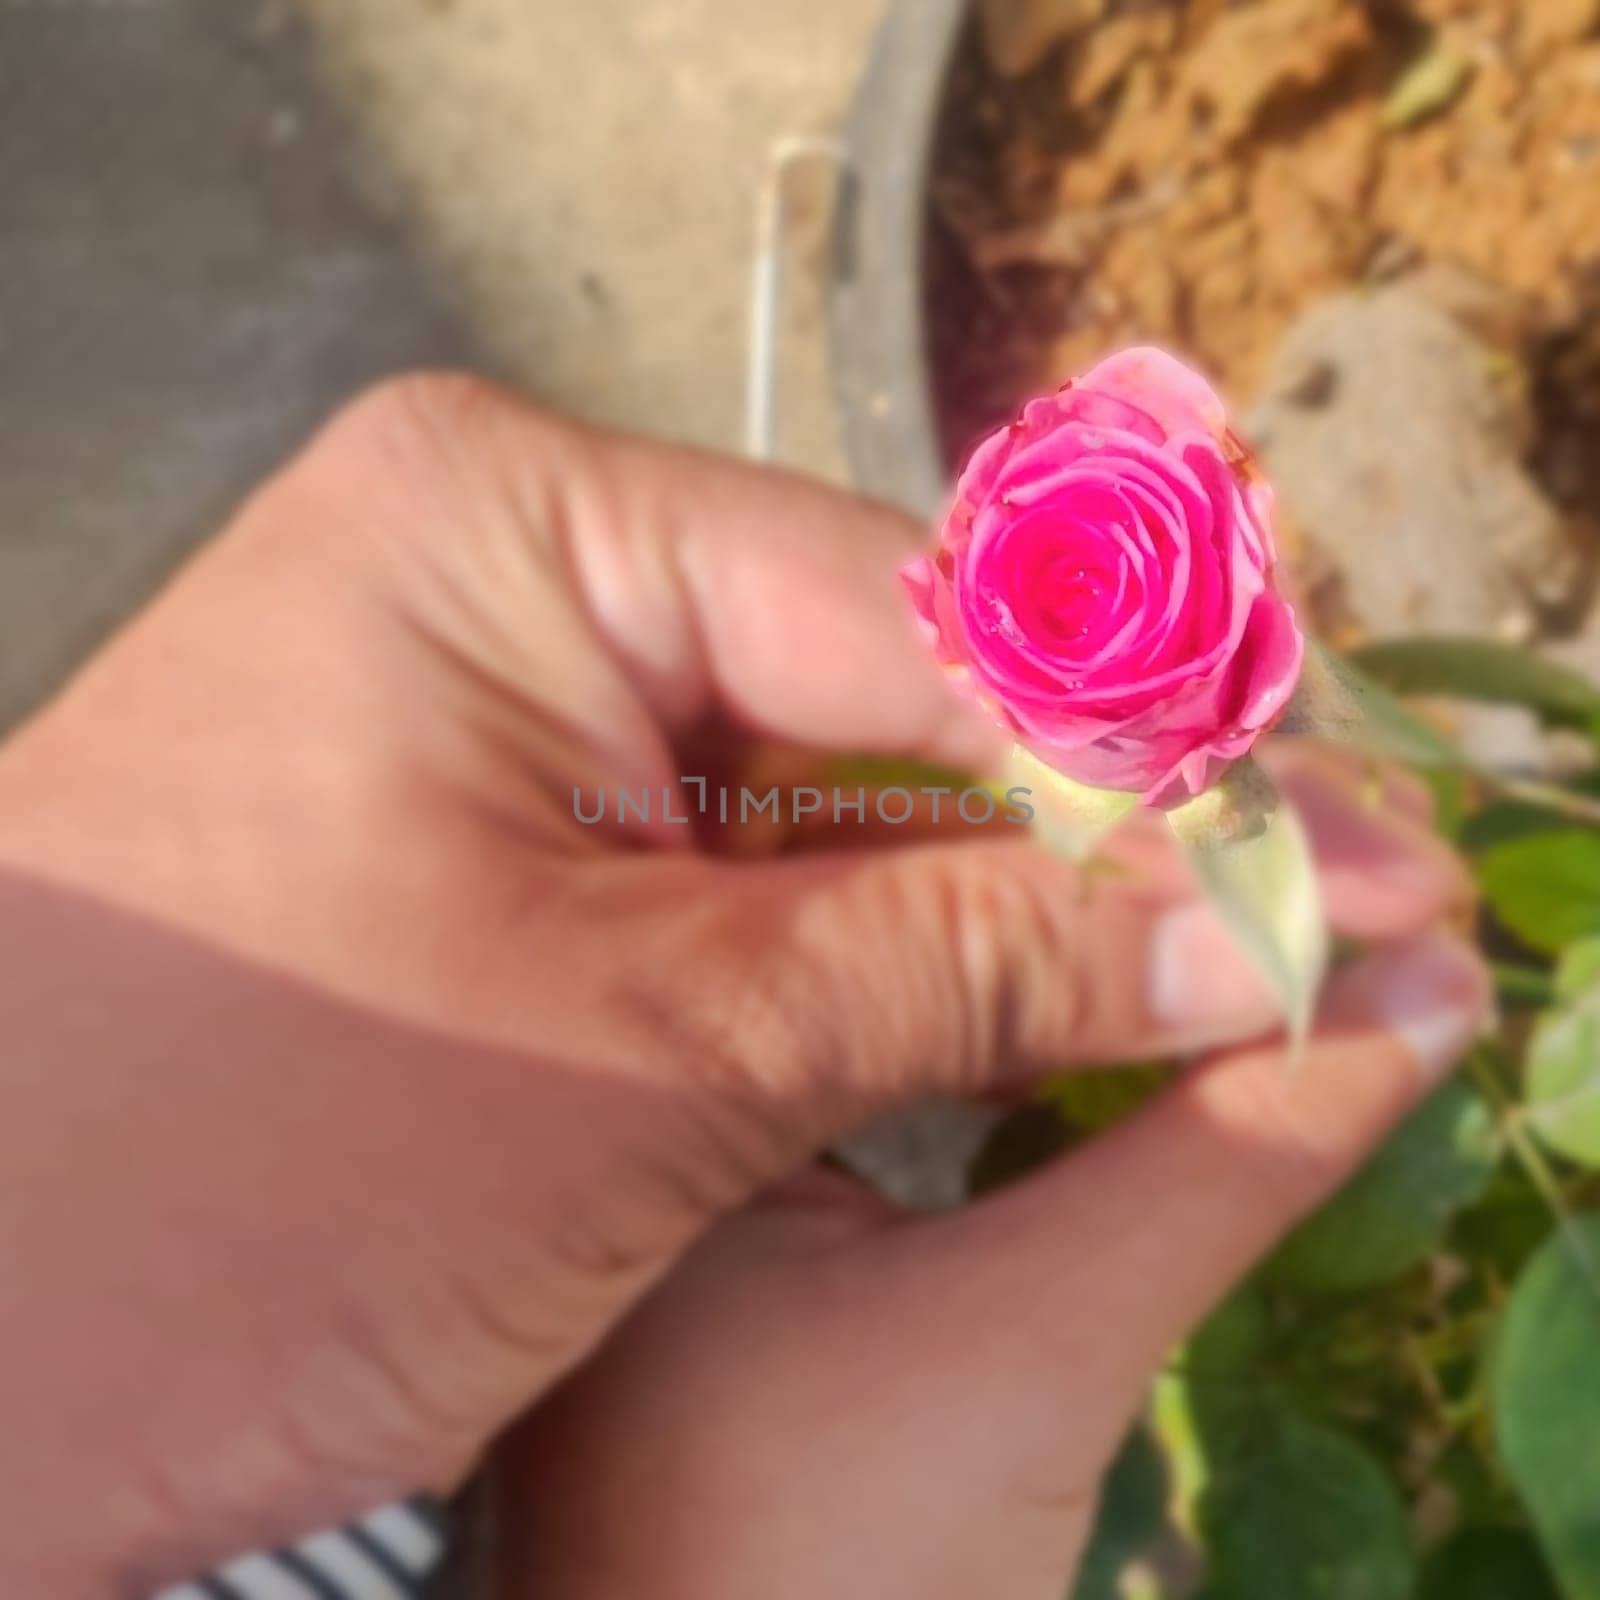 Closeup of a rose on valentine's day and rose day with focus on the subjects, Rose is a symbol of love and compassion, Congrats to all celebrating valentine's day . 4k quality photo